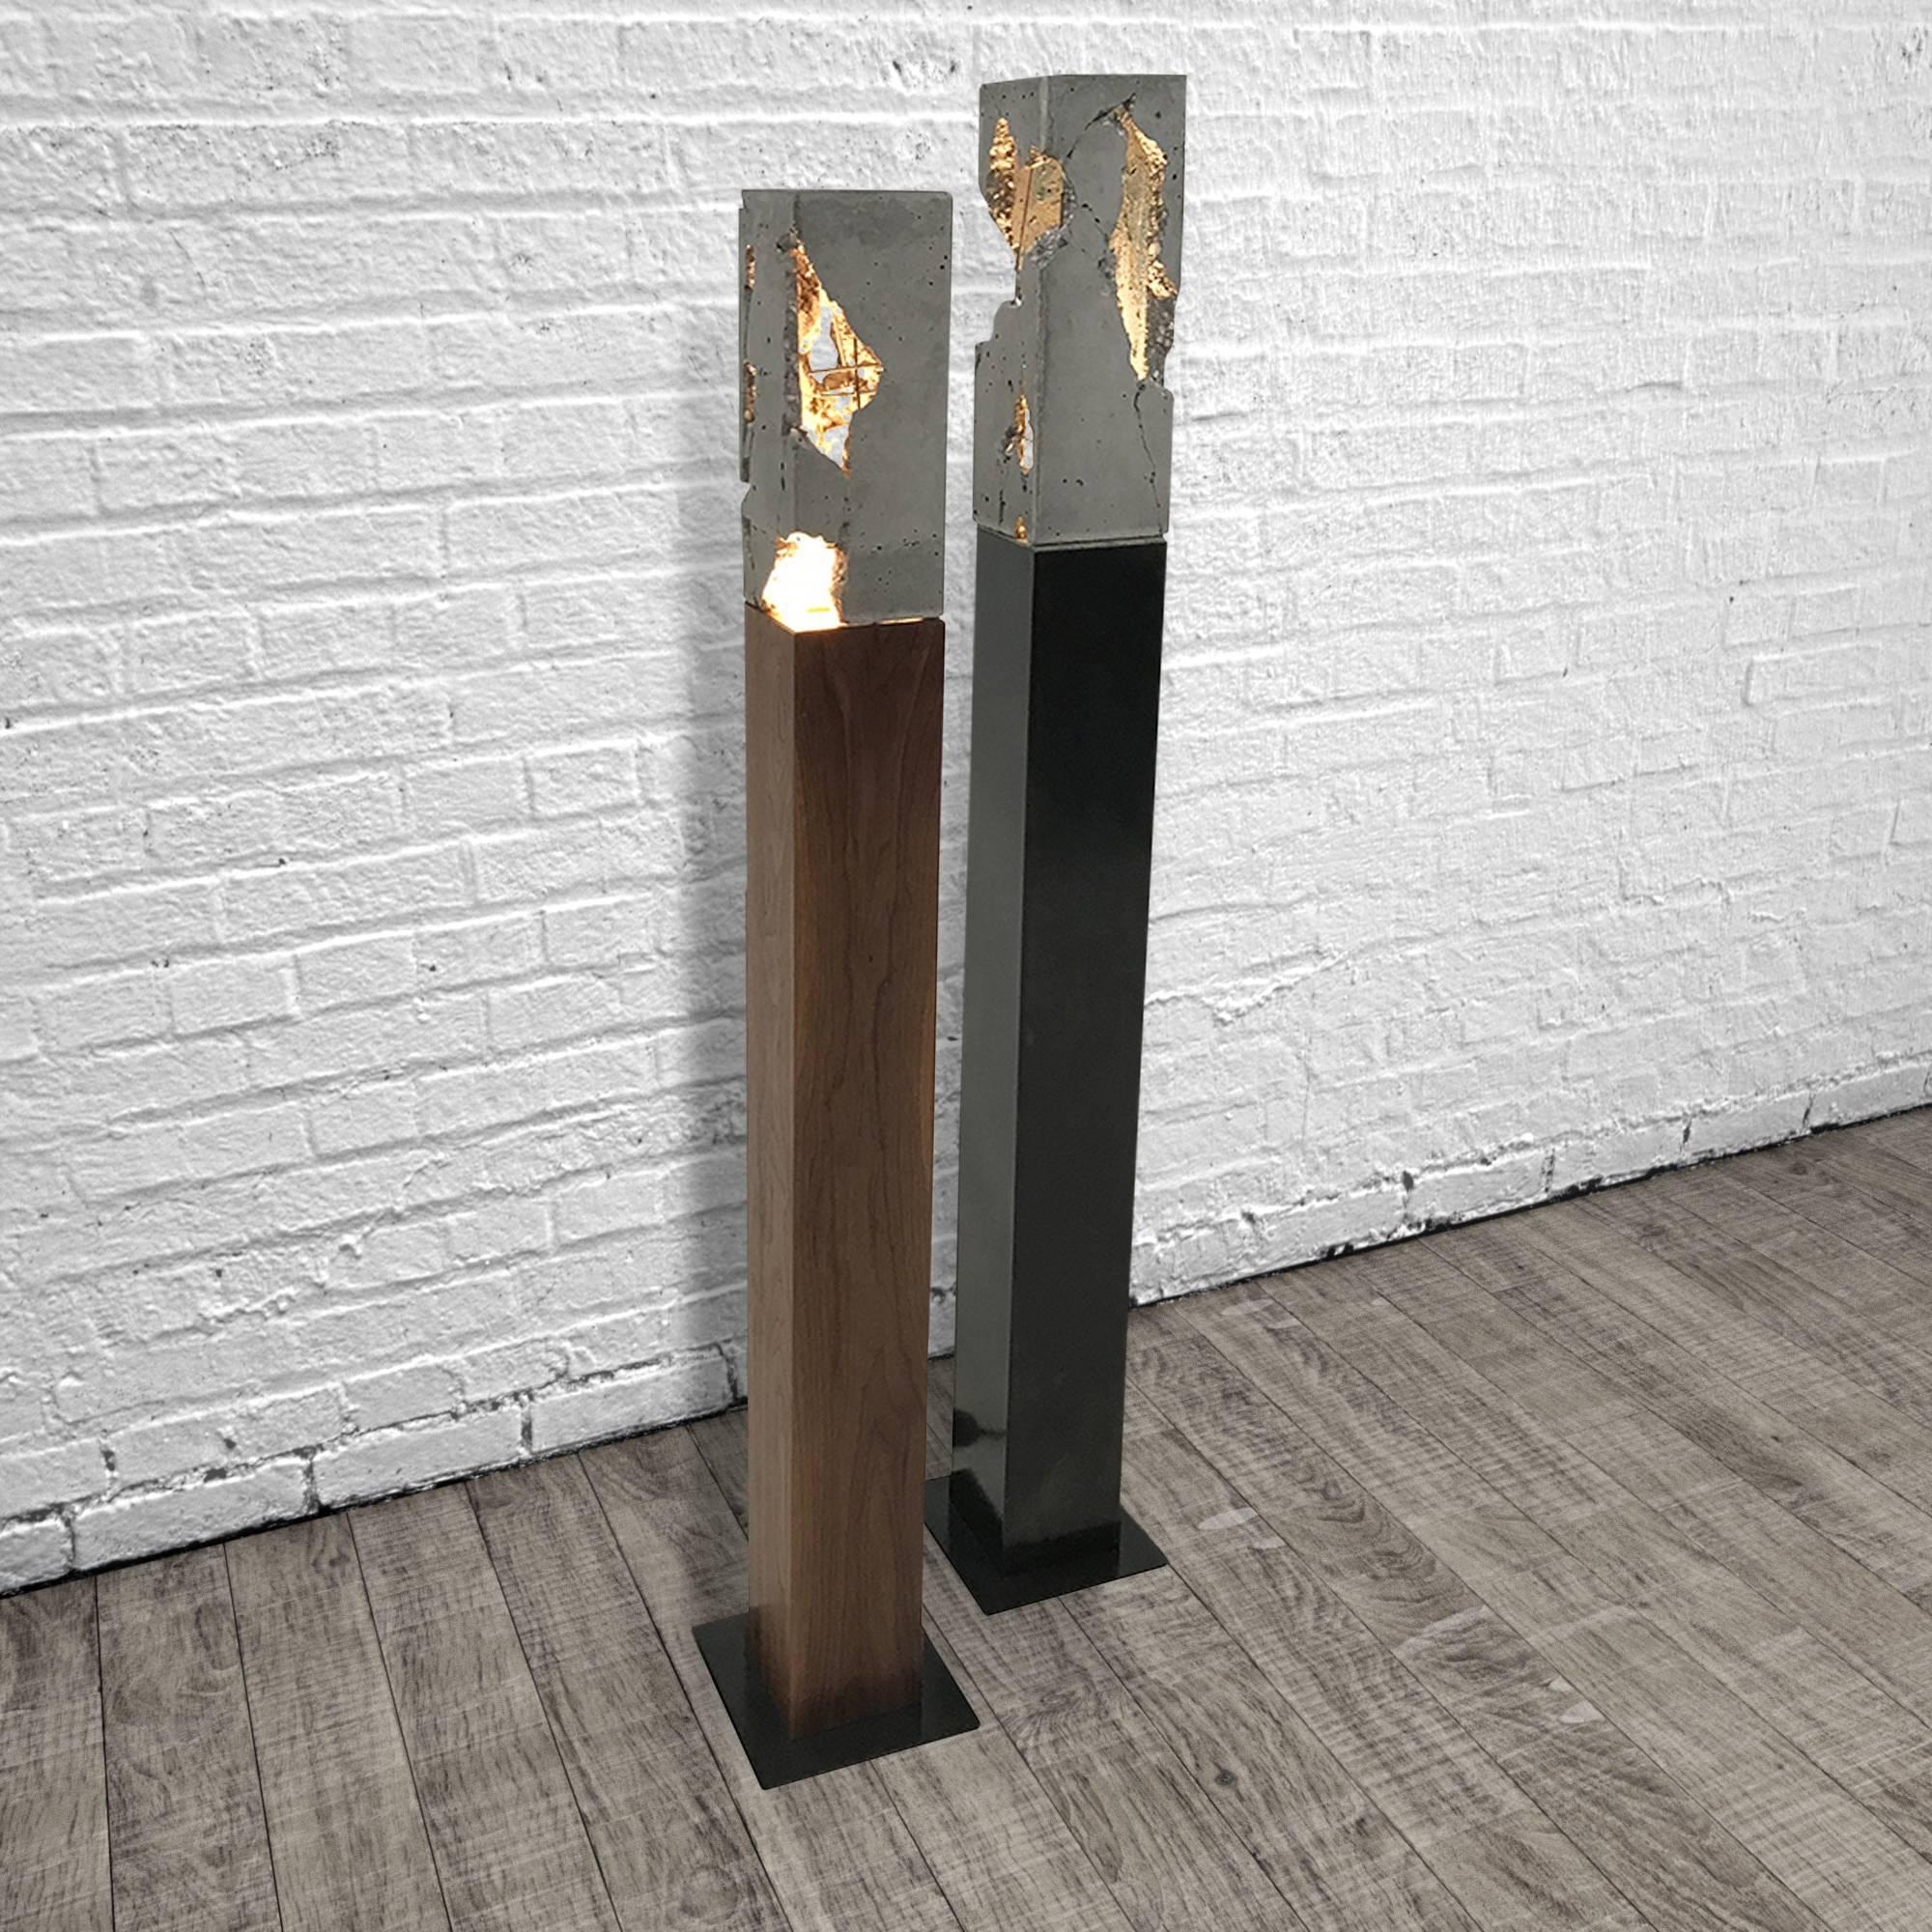 These lights are composed of a solid wood or hand-blackened steel base with a cast-concrete 